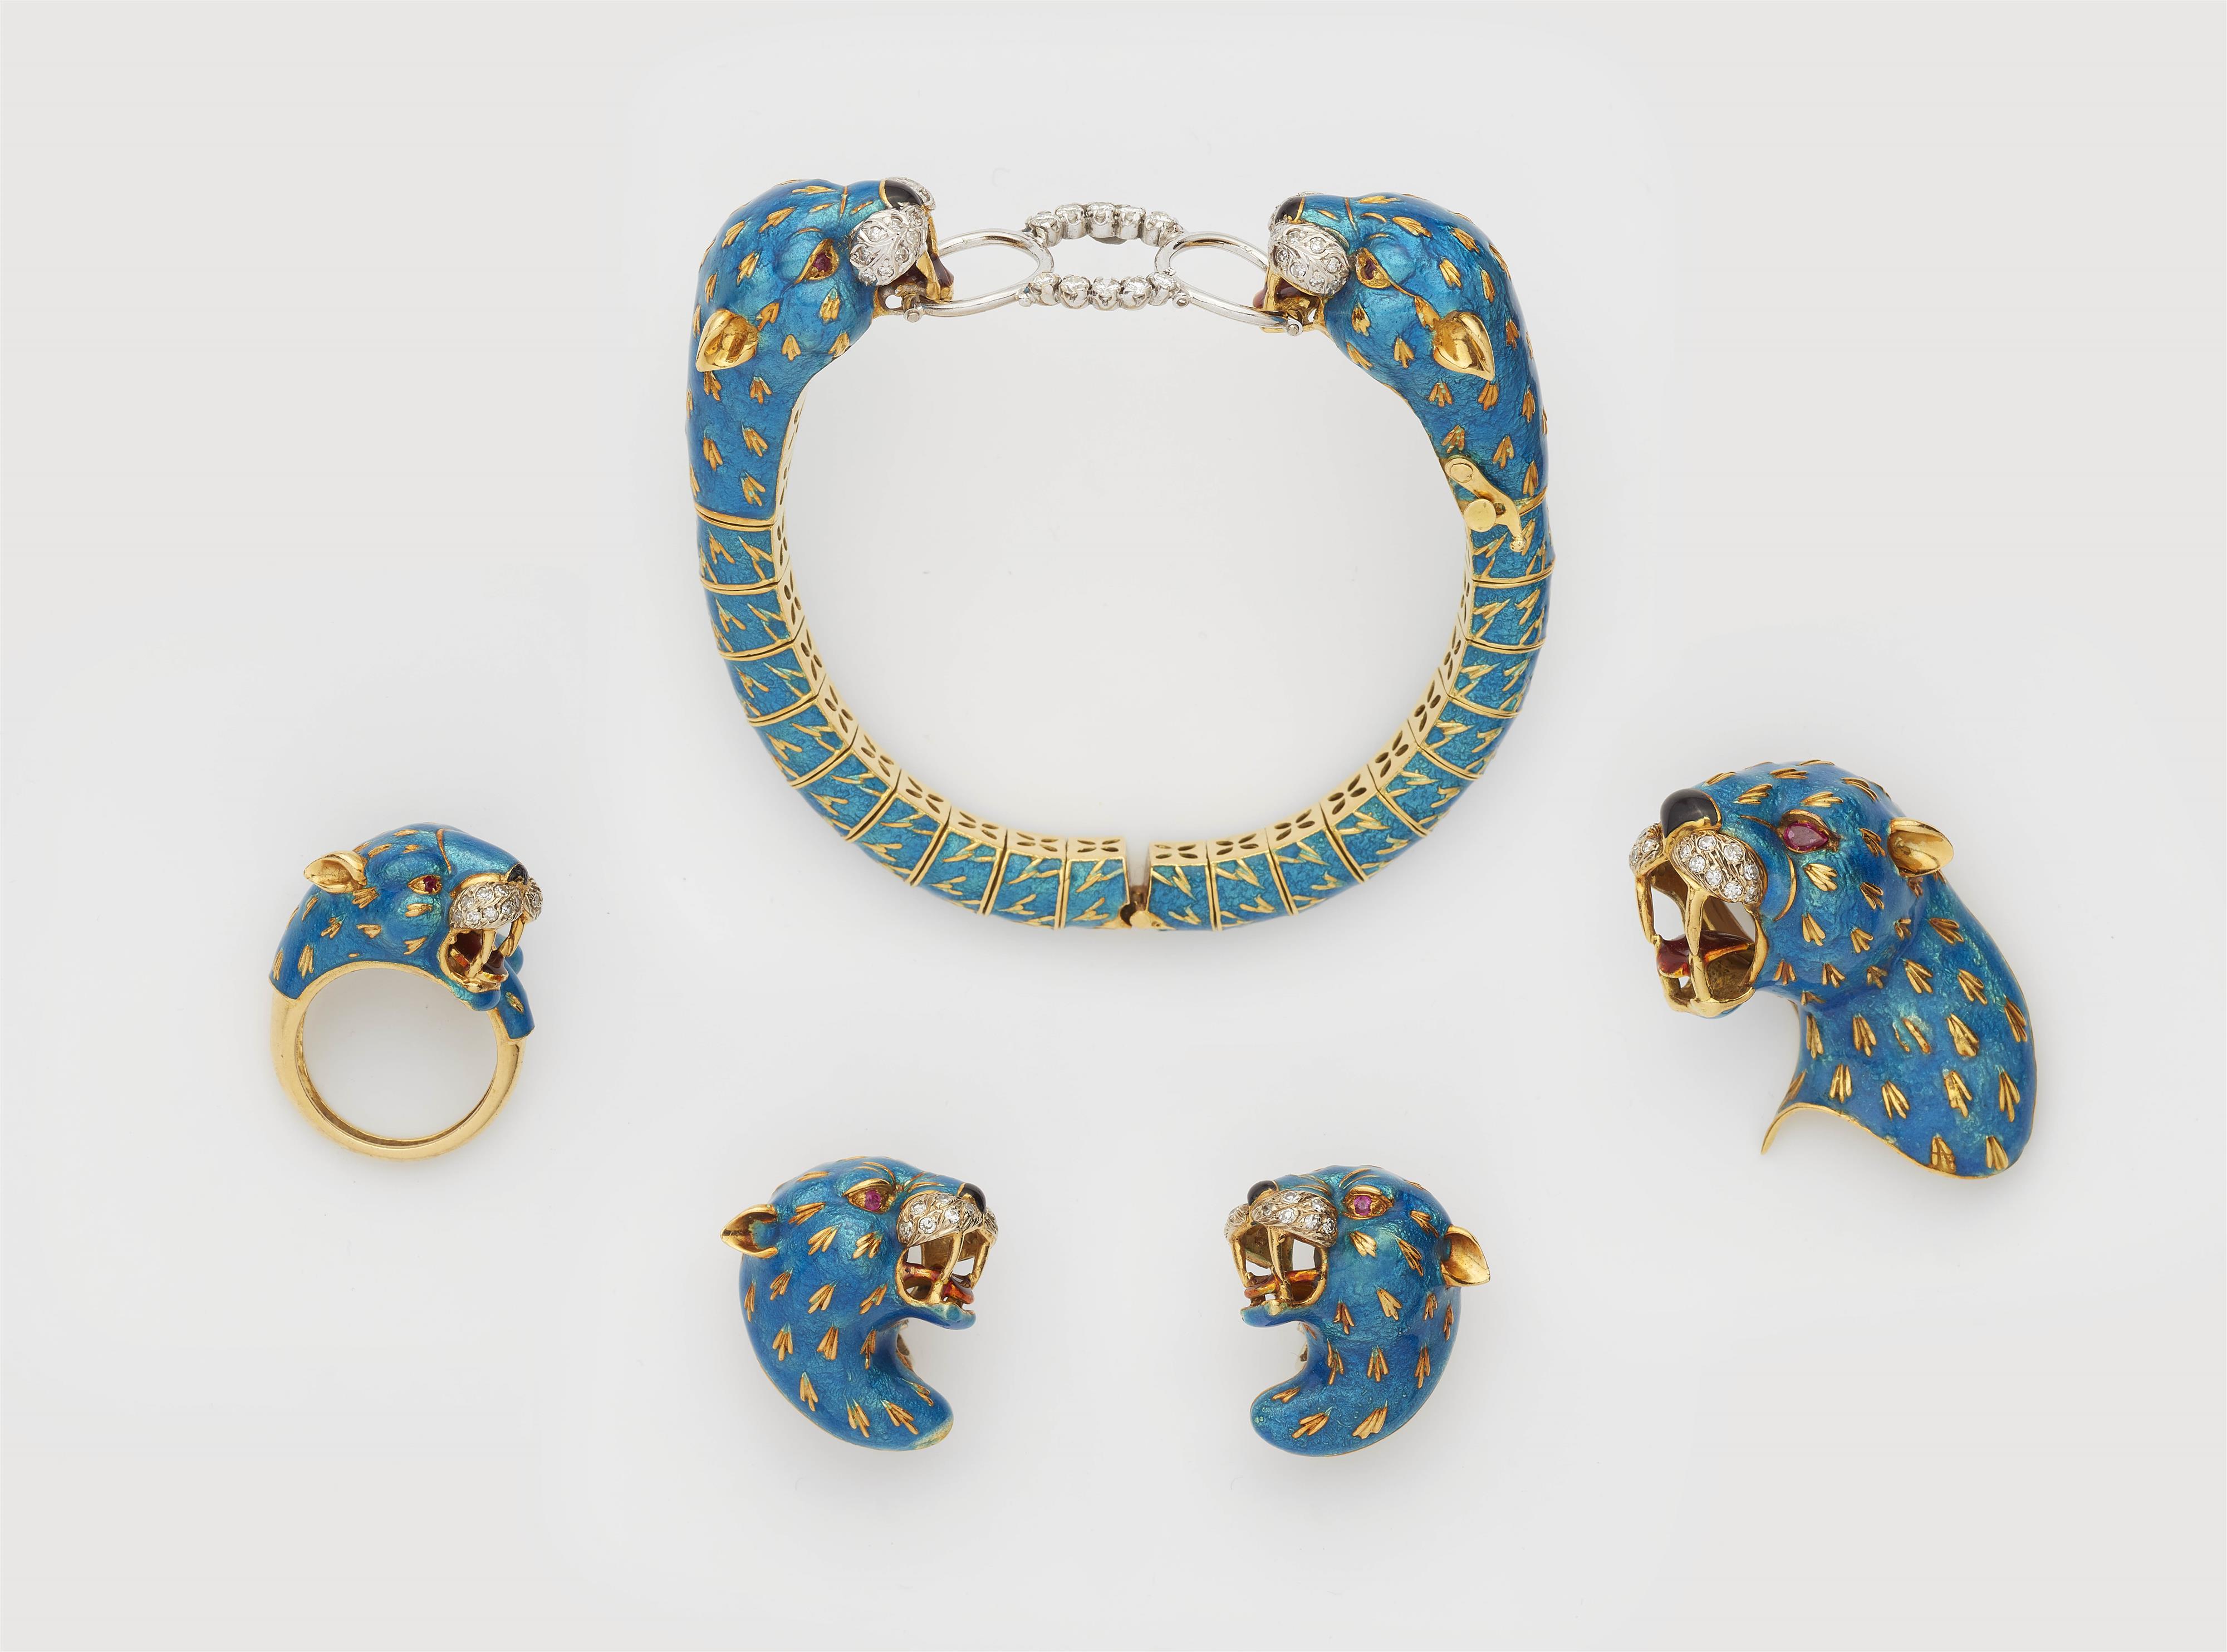 An 18k gold diamond and enamel demi-parure from the "Bestario Feroce" collection by Pierino Frascarolo. - image-1